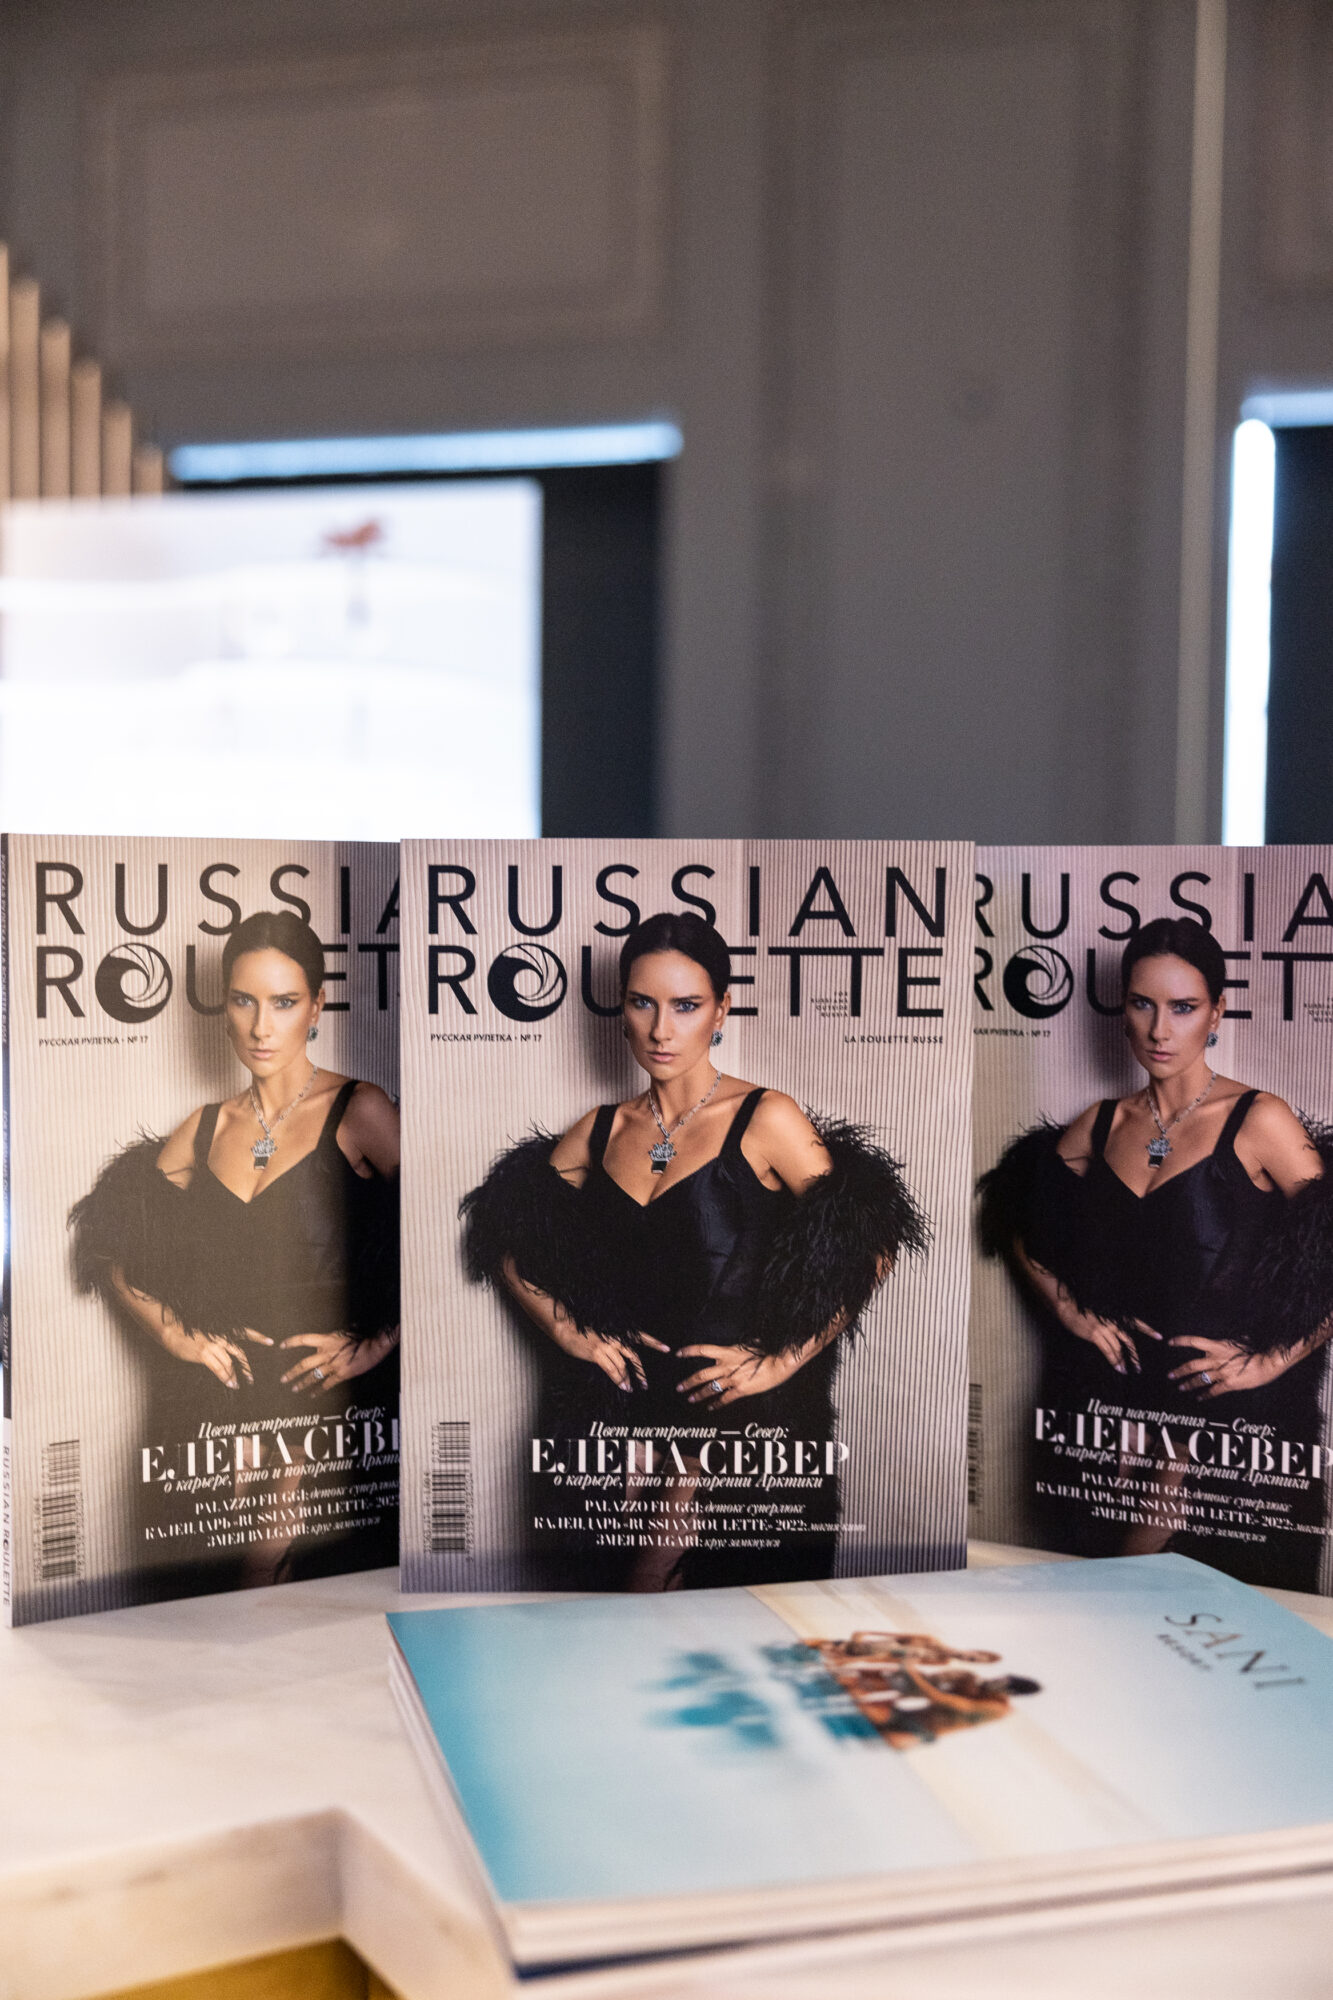 Russian Roulette Magazine at The Toy Moscow